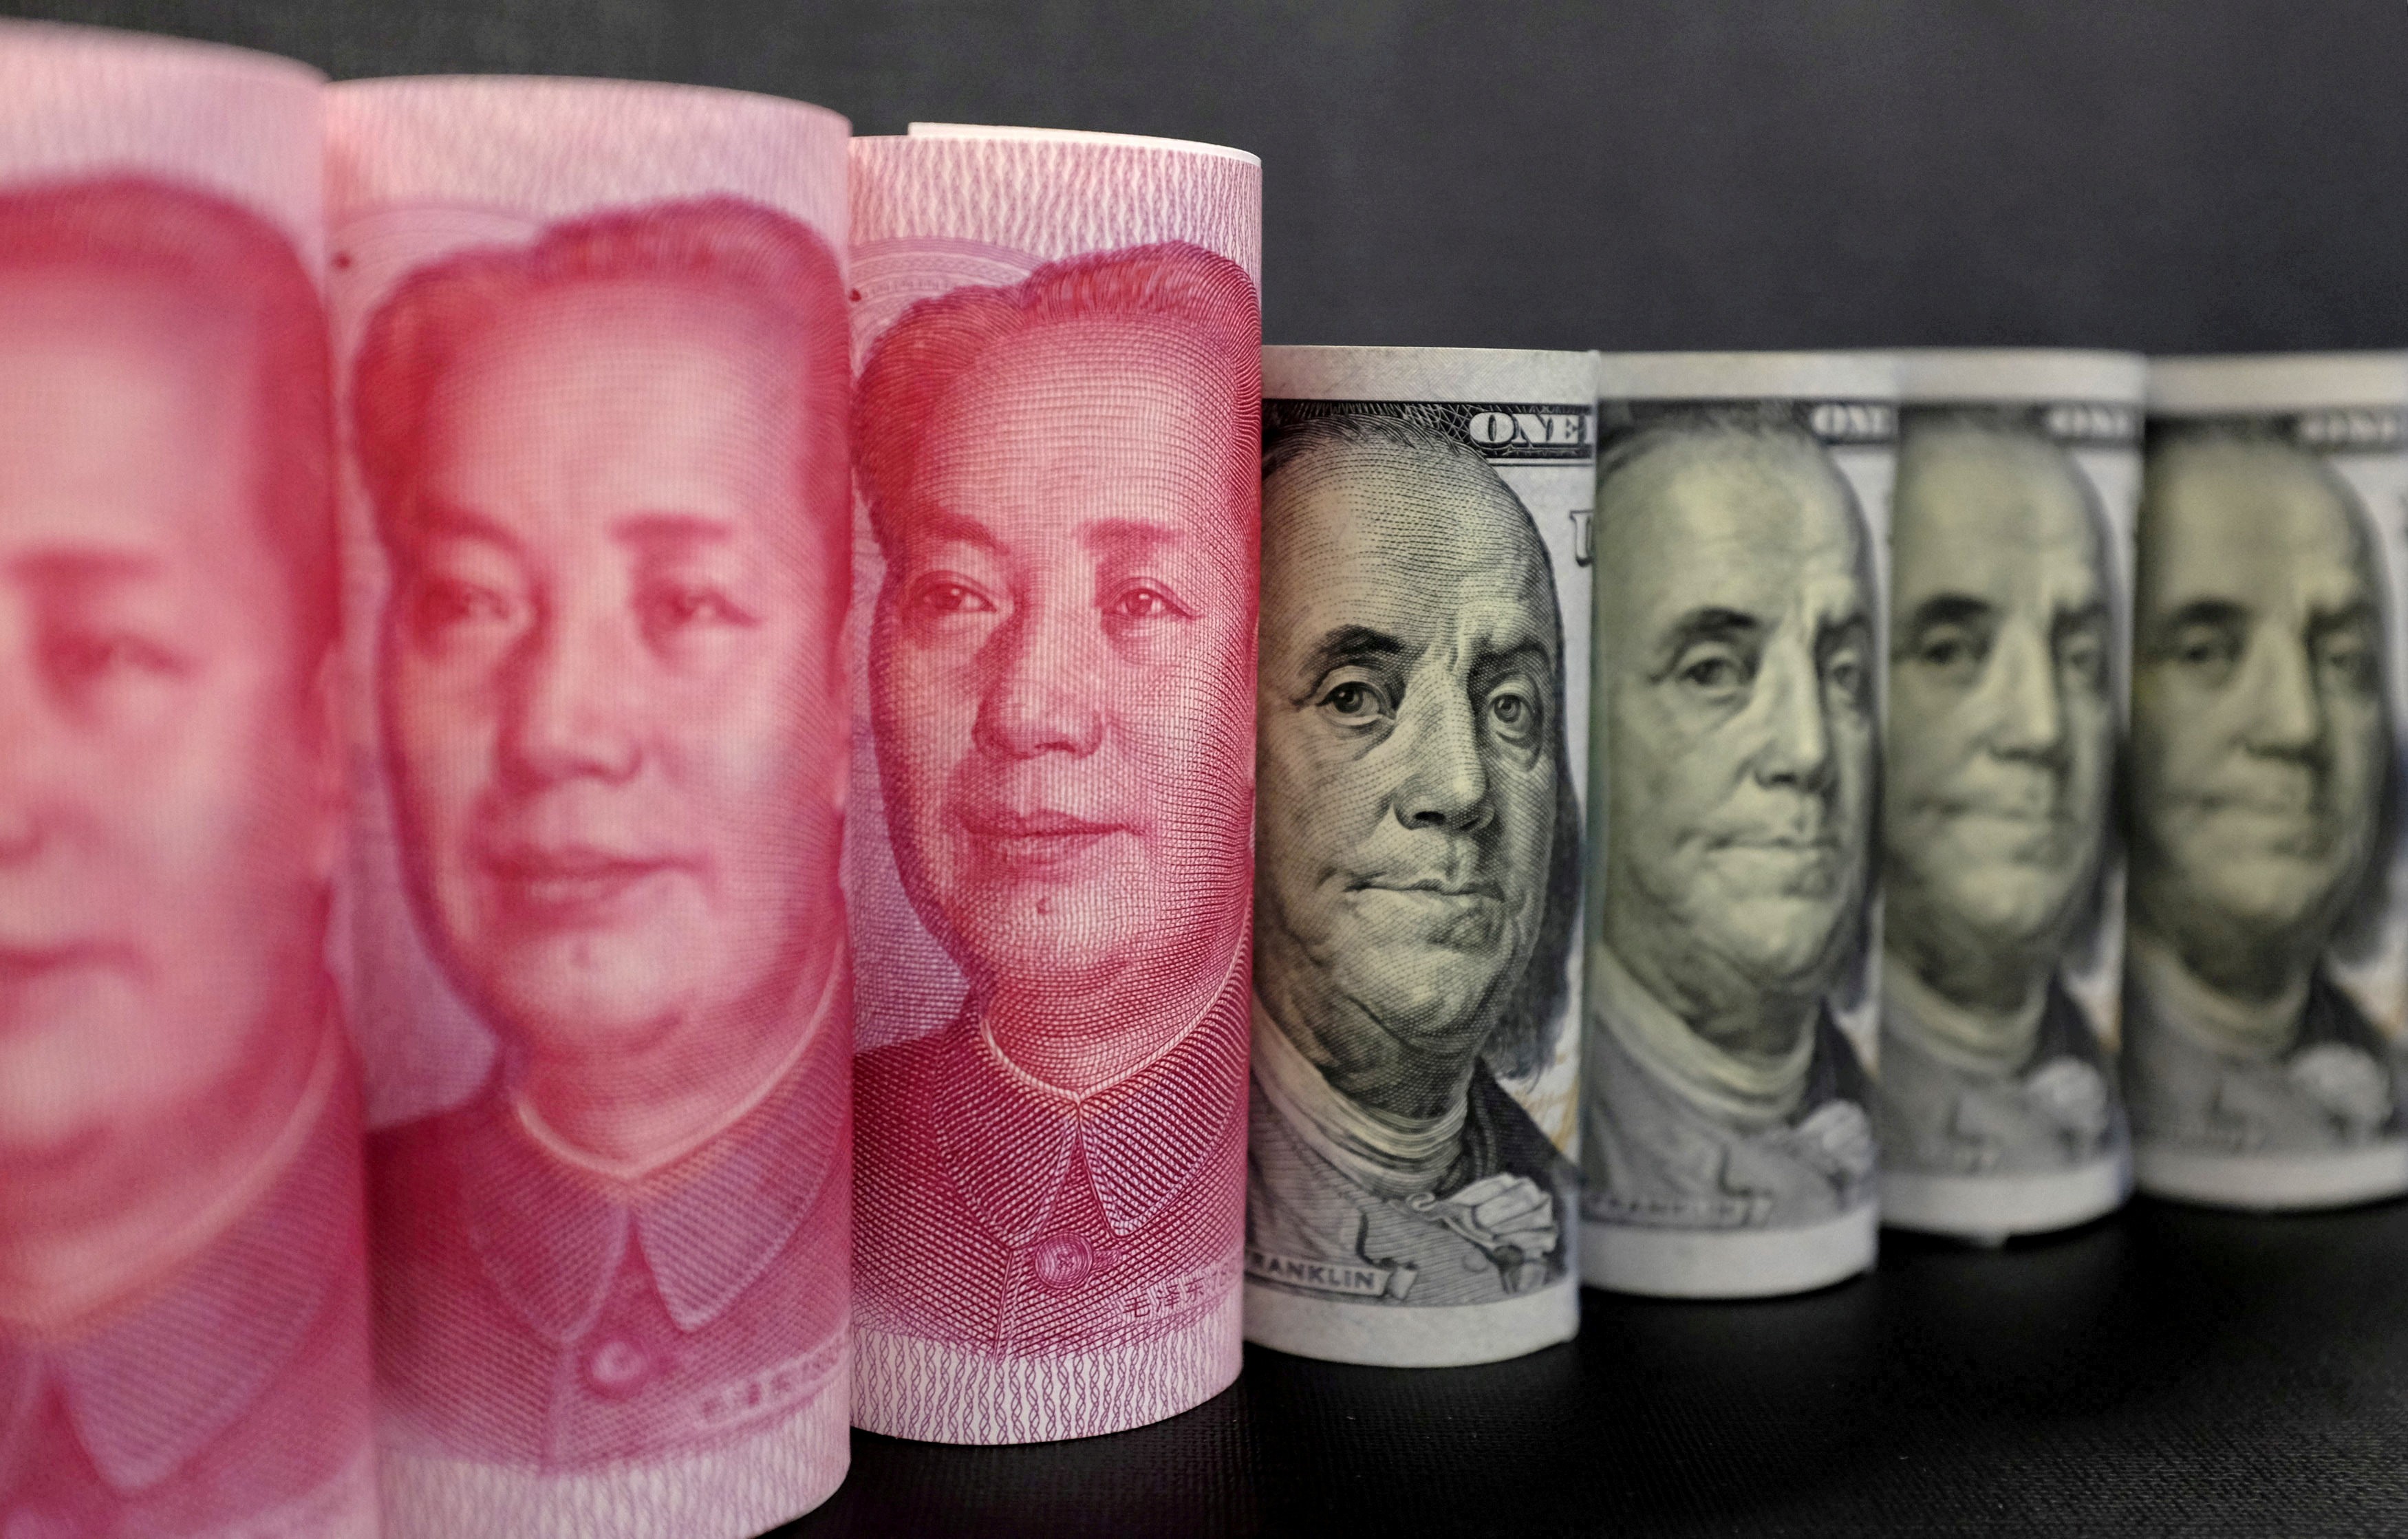 News of a “very good conversation” on trade between presidents Donald Trump and Xi Jinping has strengthened the yuan-dollar rate. But the Chinese currency’s outlook remains uncertain. Photo: Reuters